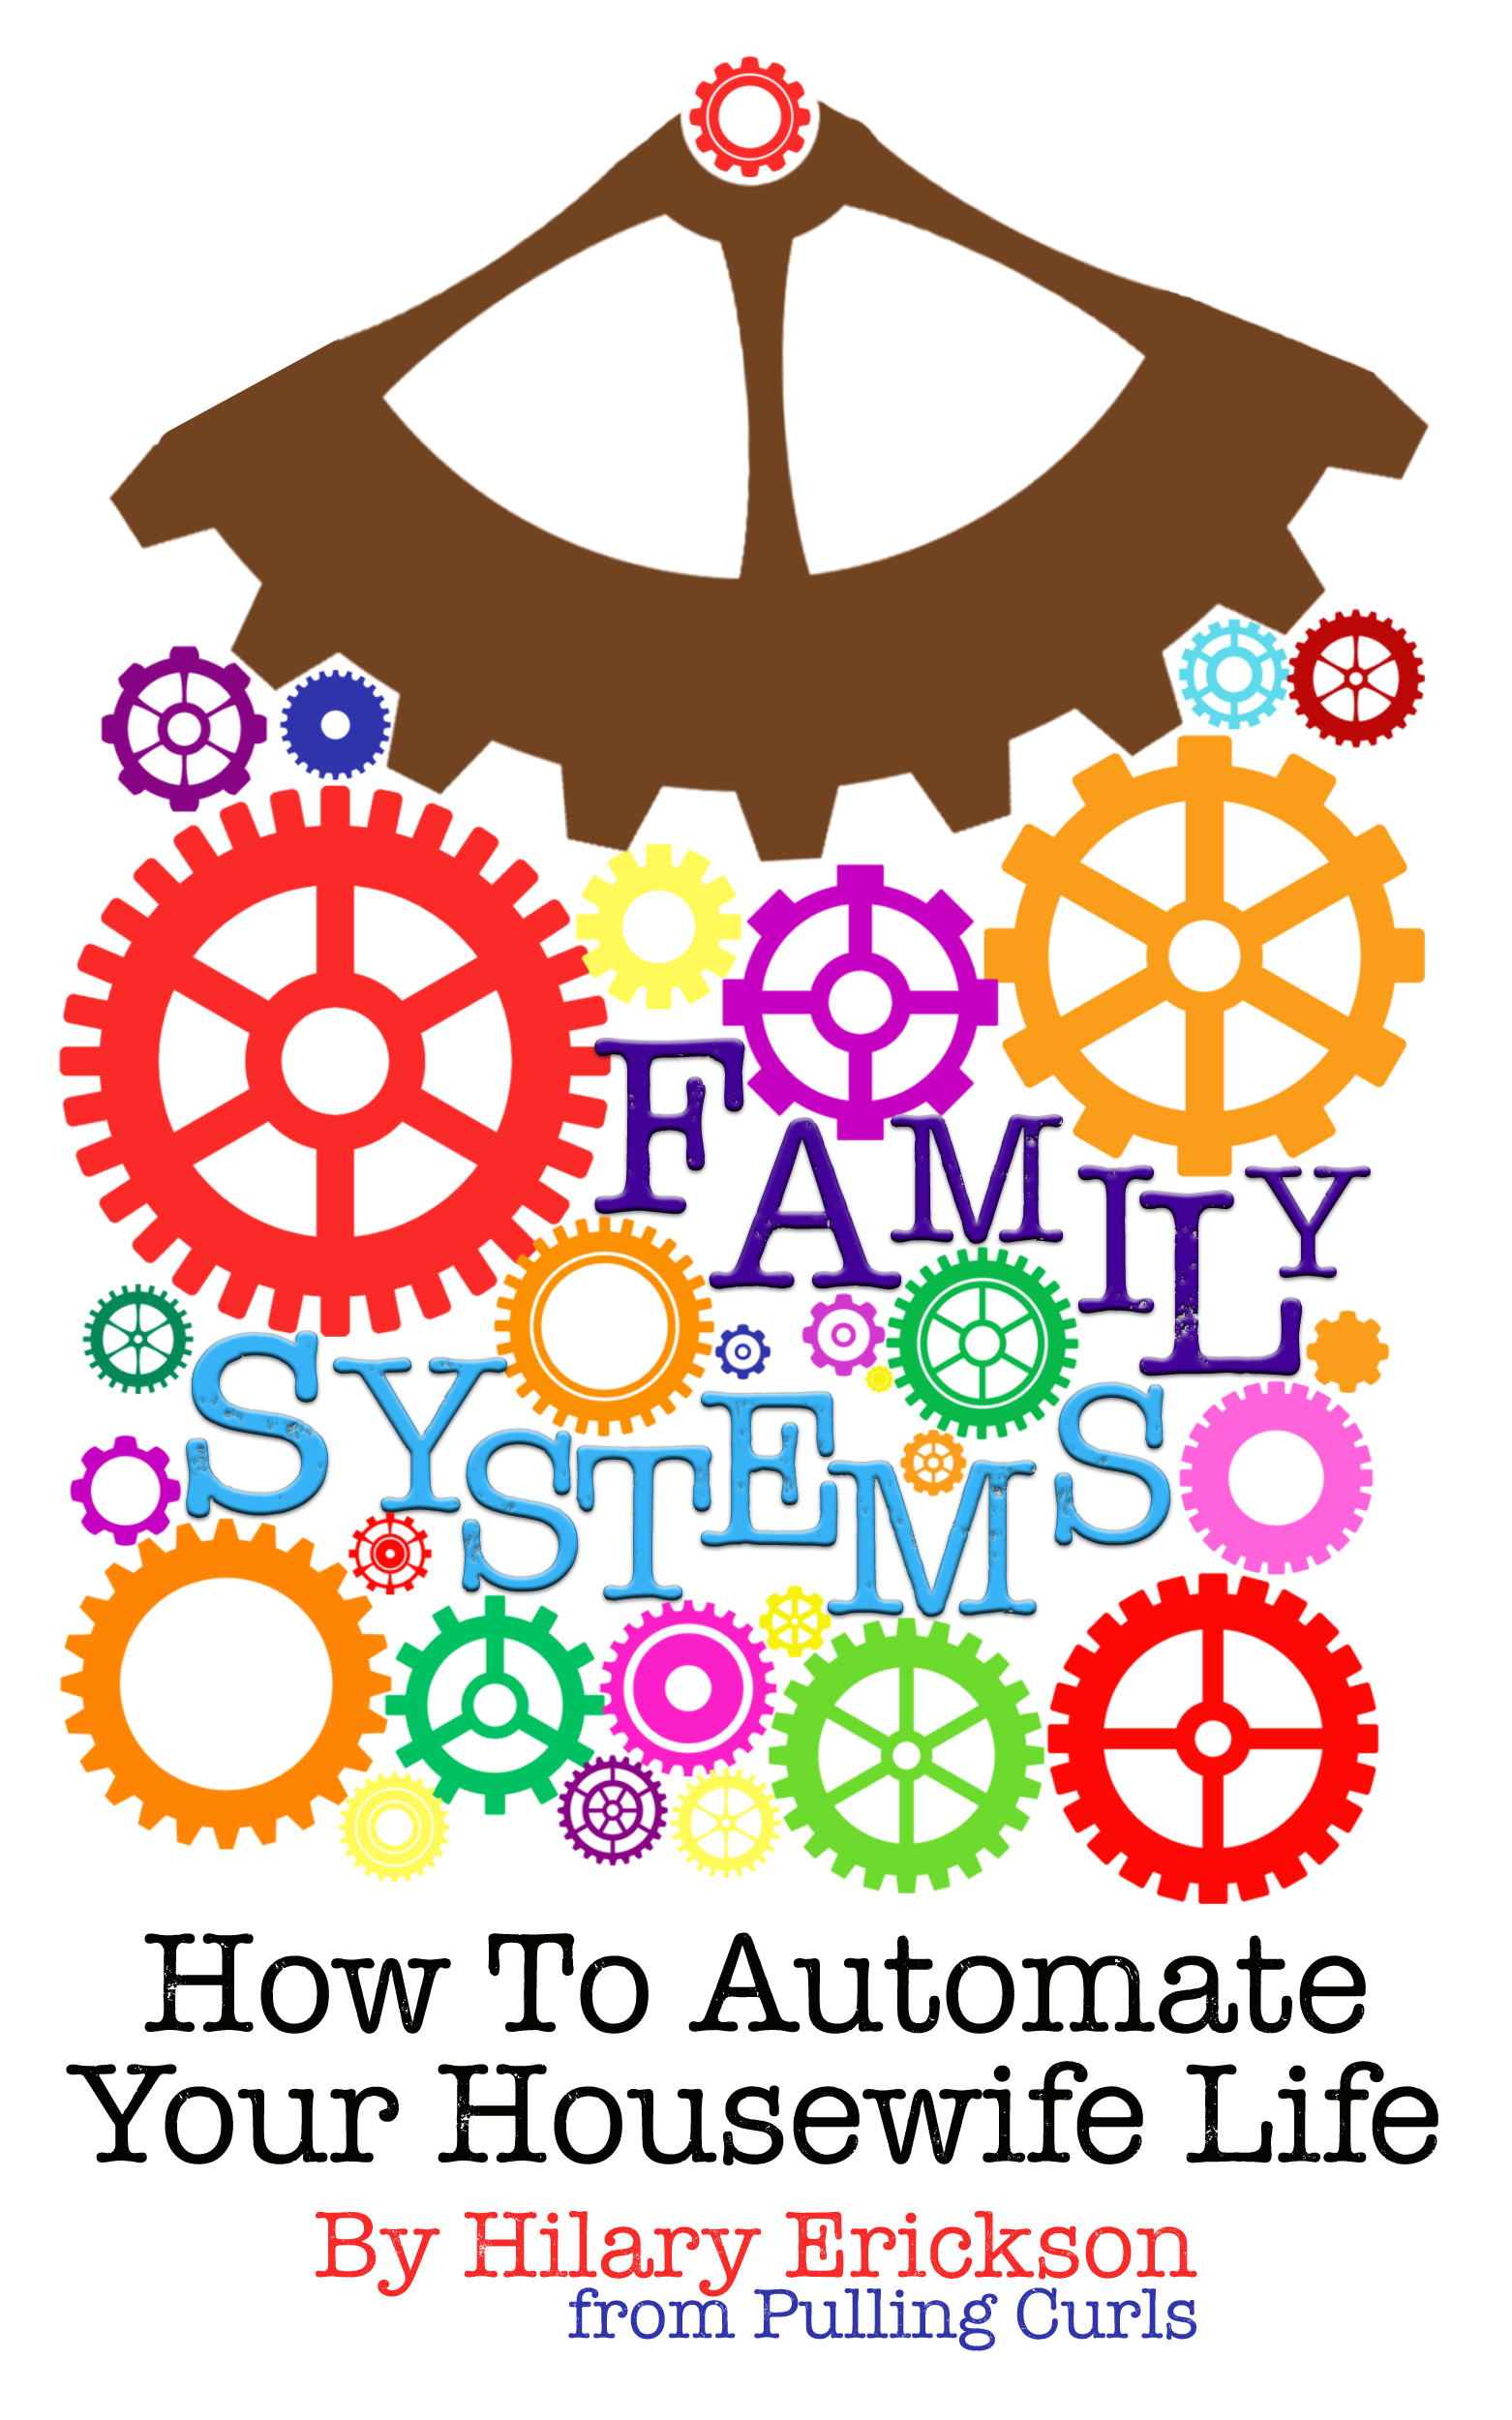 family systems